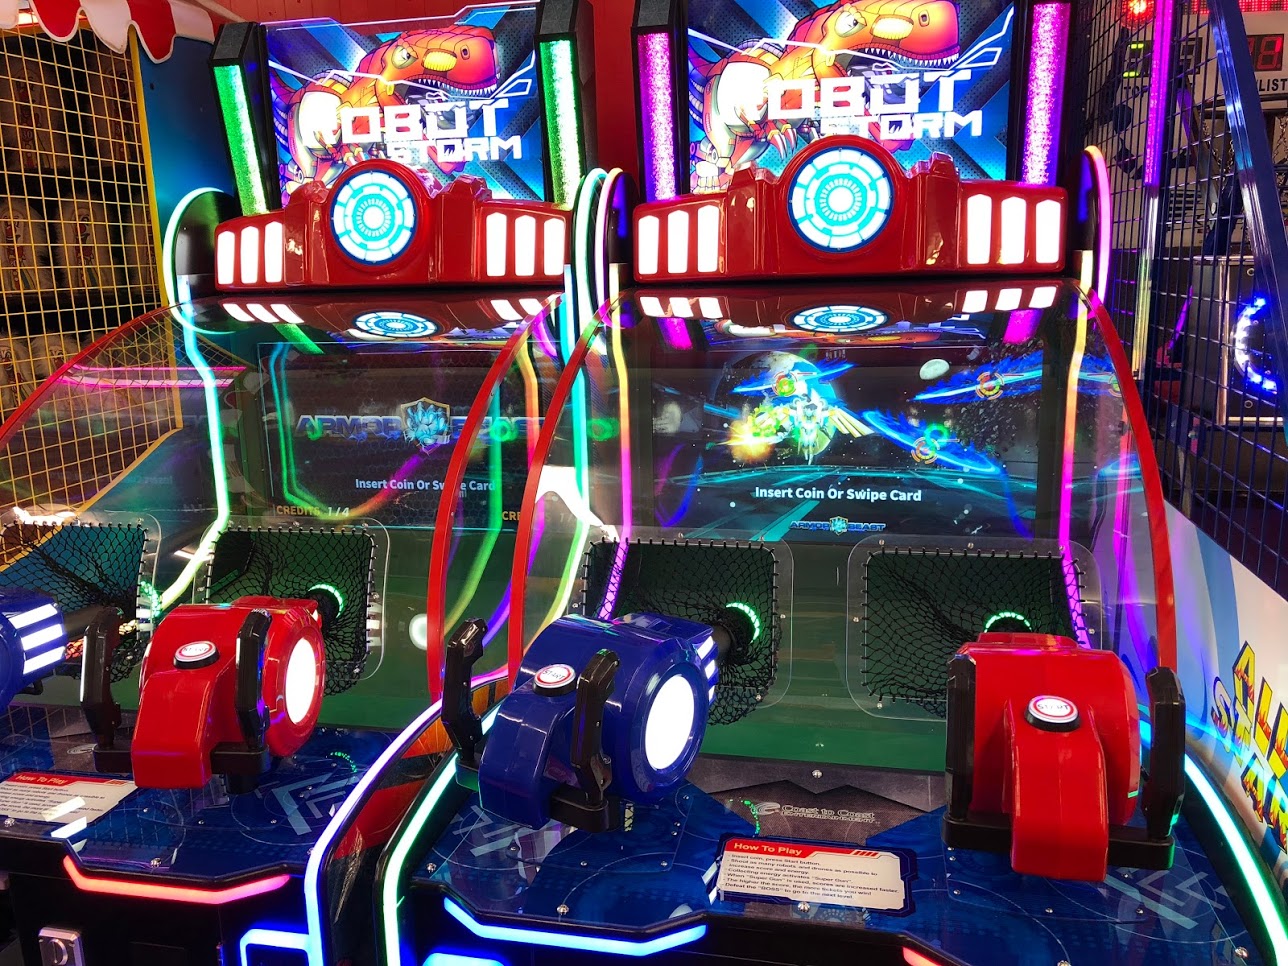 Wind and cloud:2 players fighting arcade games